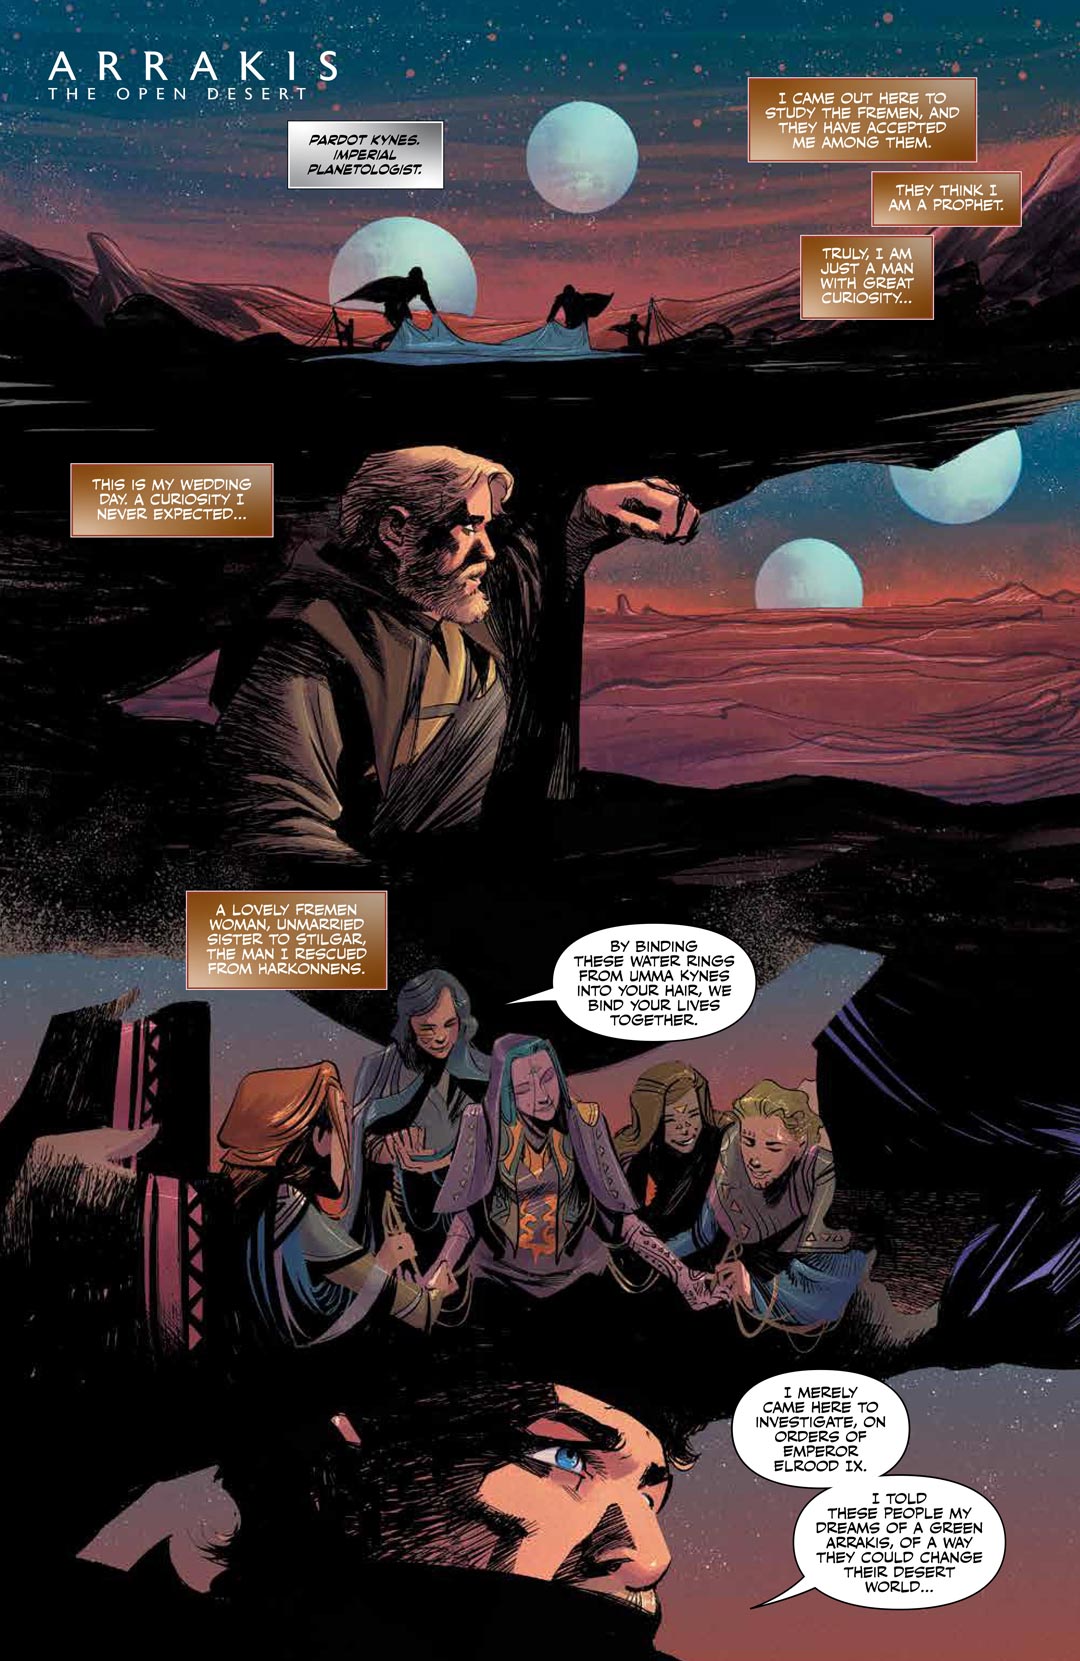 Dune: House Atreides comic series. Issue #7, preview page 1.